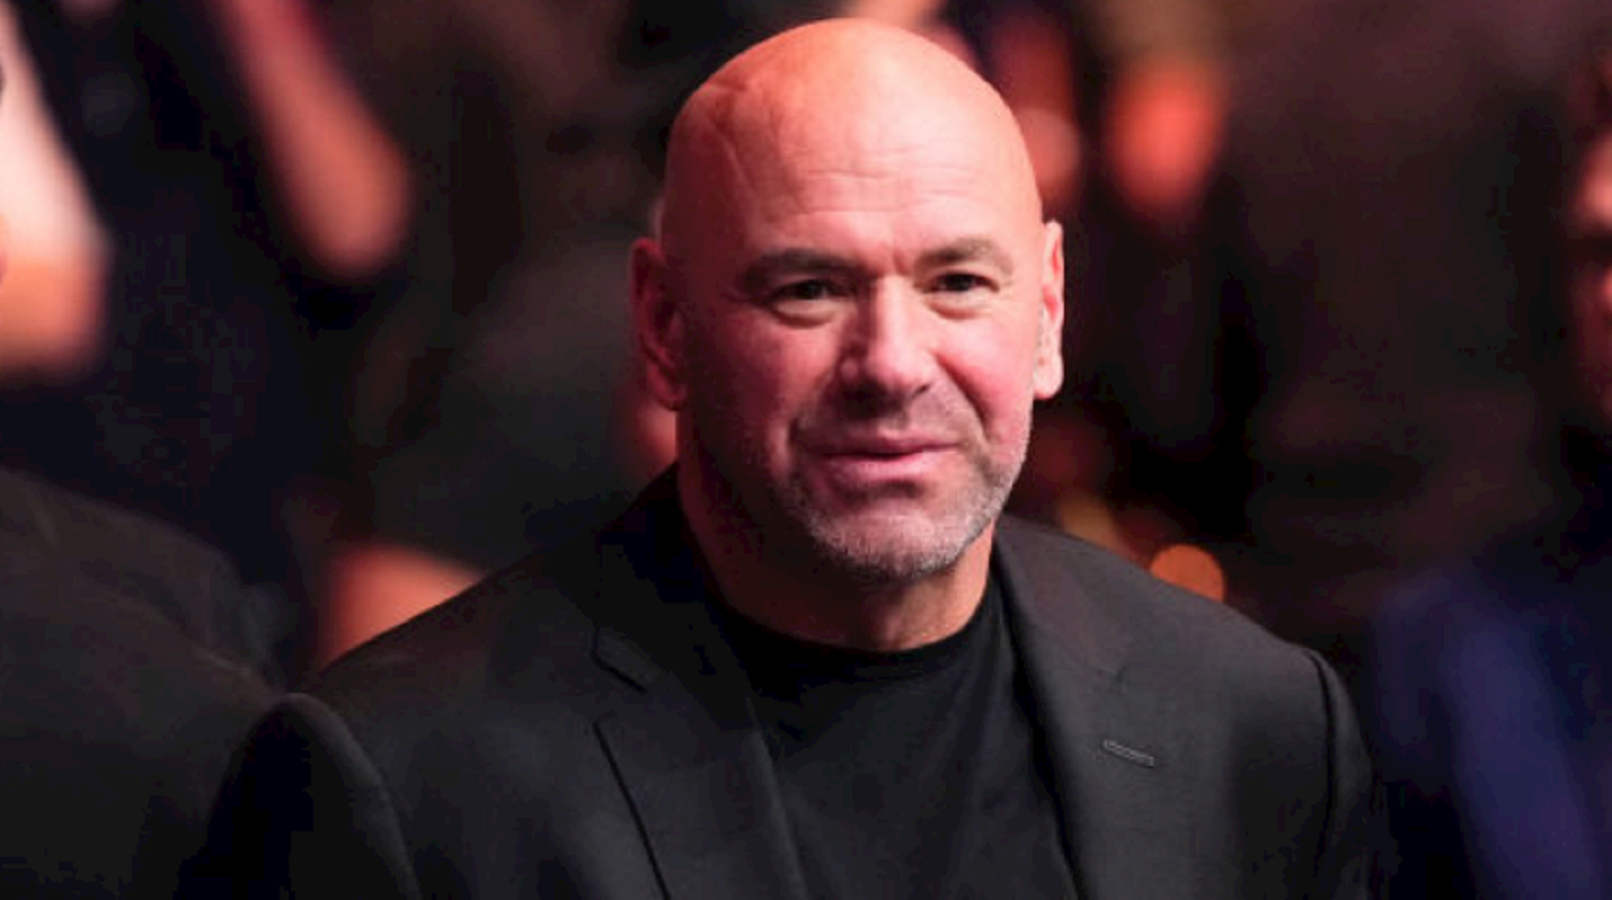 Dana White Shows Off Stunning Body Transformation After Doing 86 Hour Water Fast Brobible 